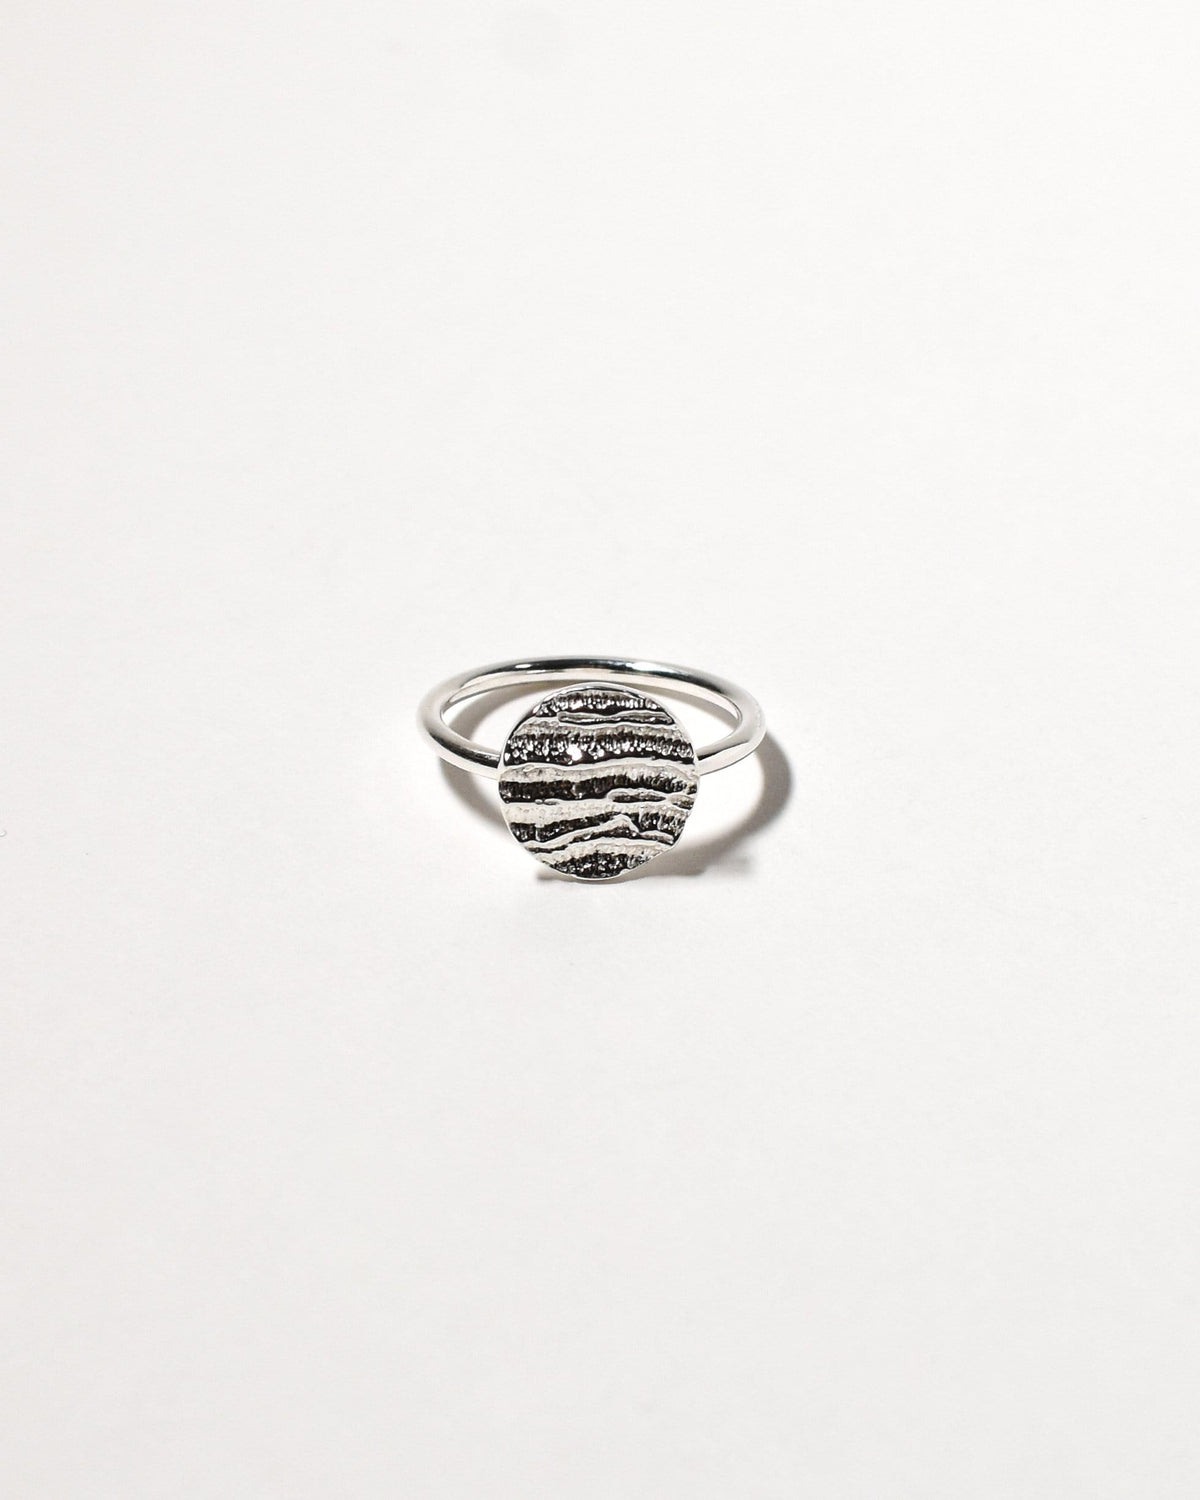 Kutti Ring (Small). Sterling Silver